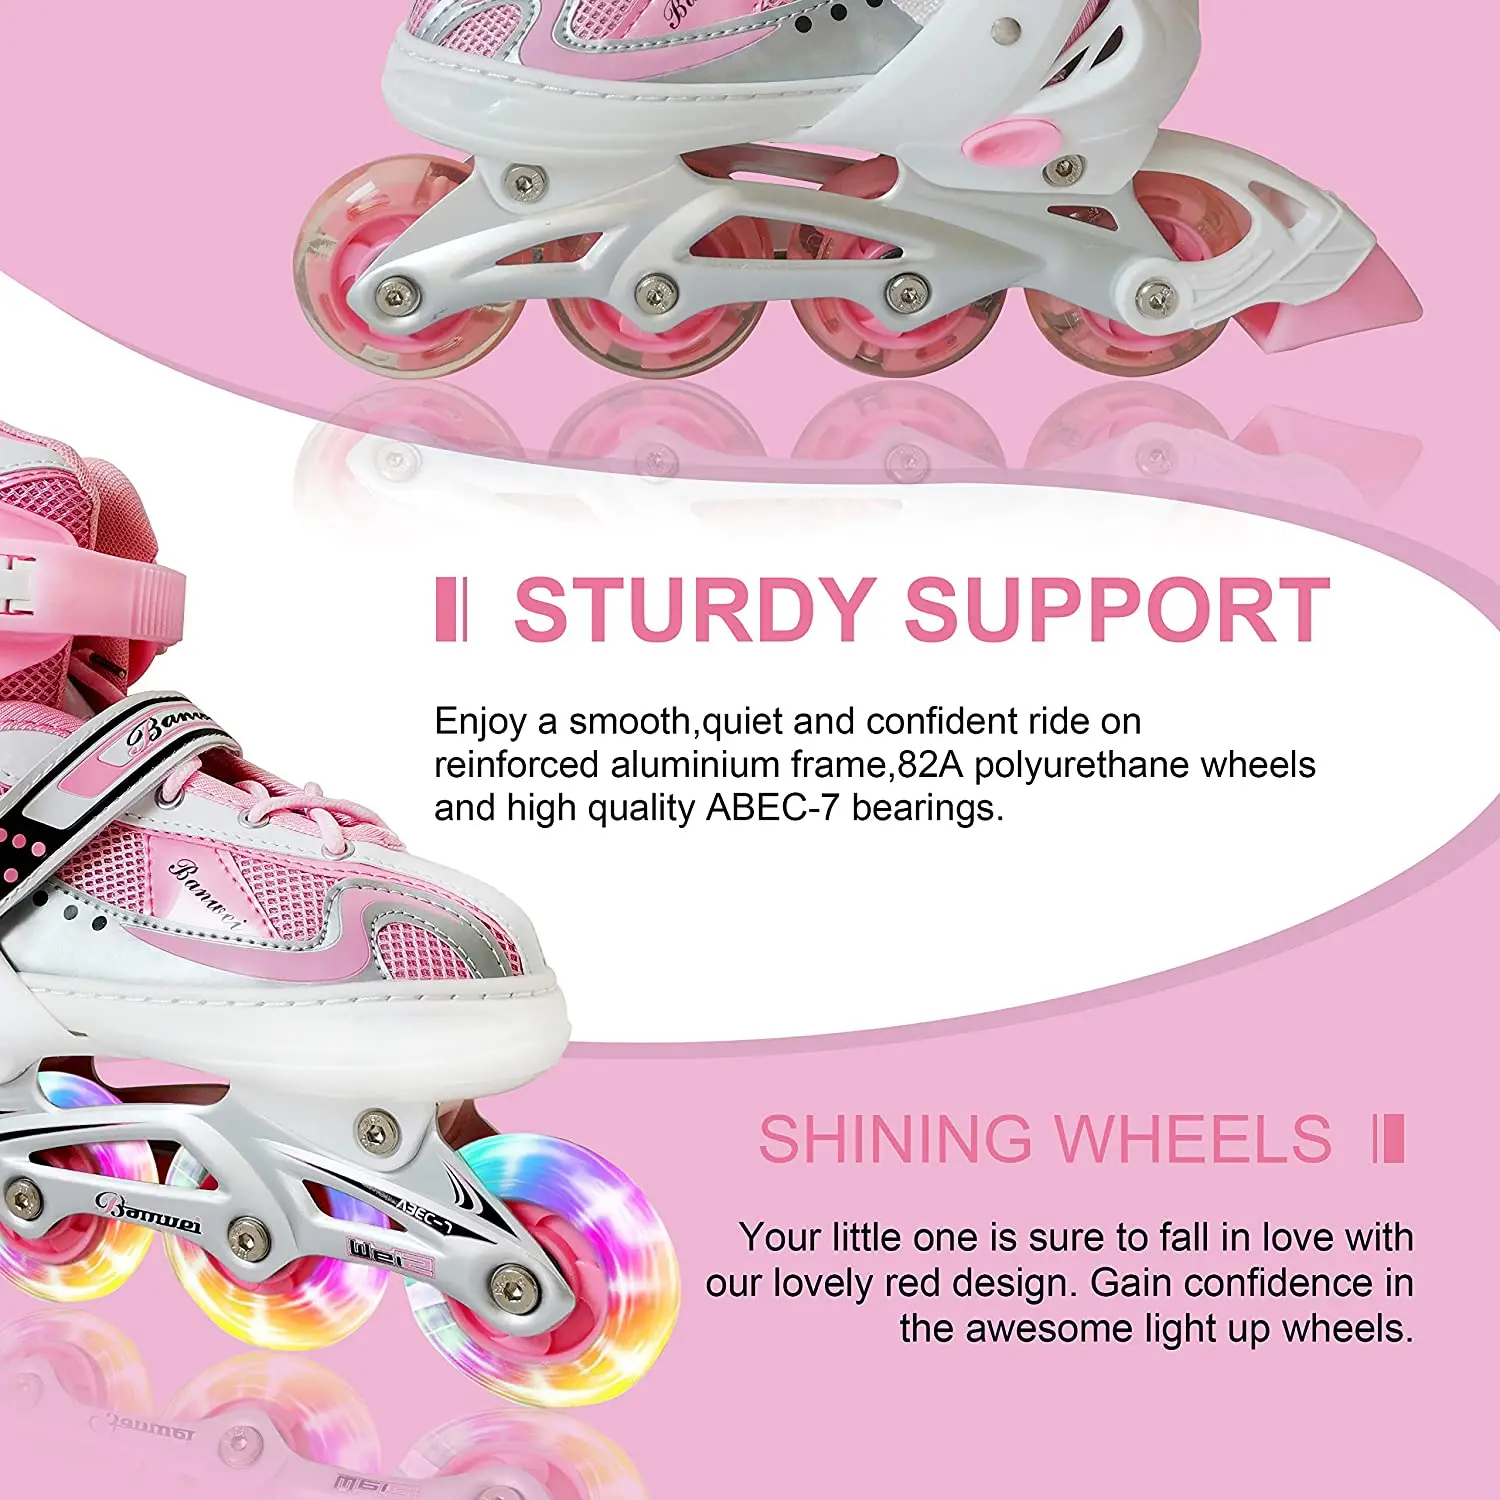 Nattork Adjustable Inline Skates for Kids,Boys and Girls with Cool Illuminating Wheels,Flashing Rollerblades for Beginners Outdoor and Indoor 